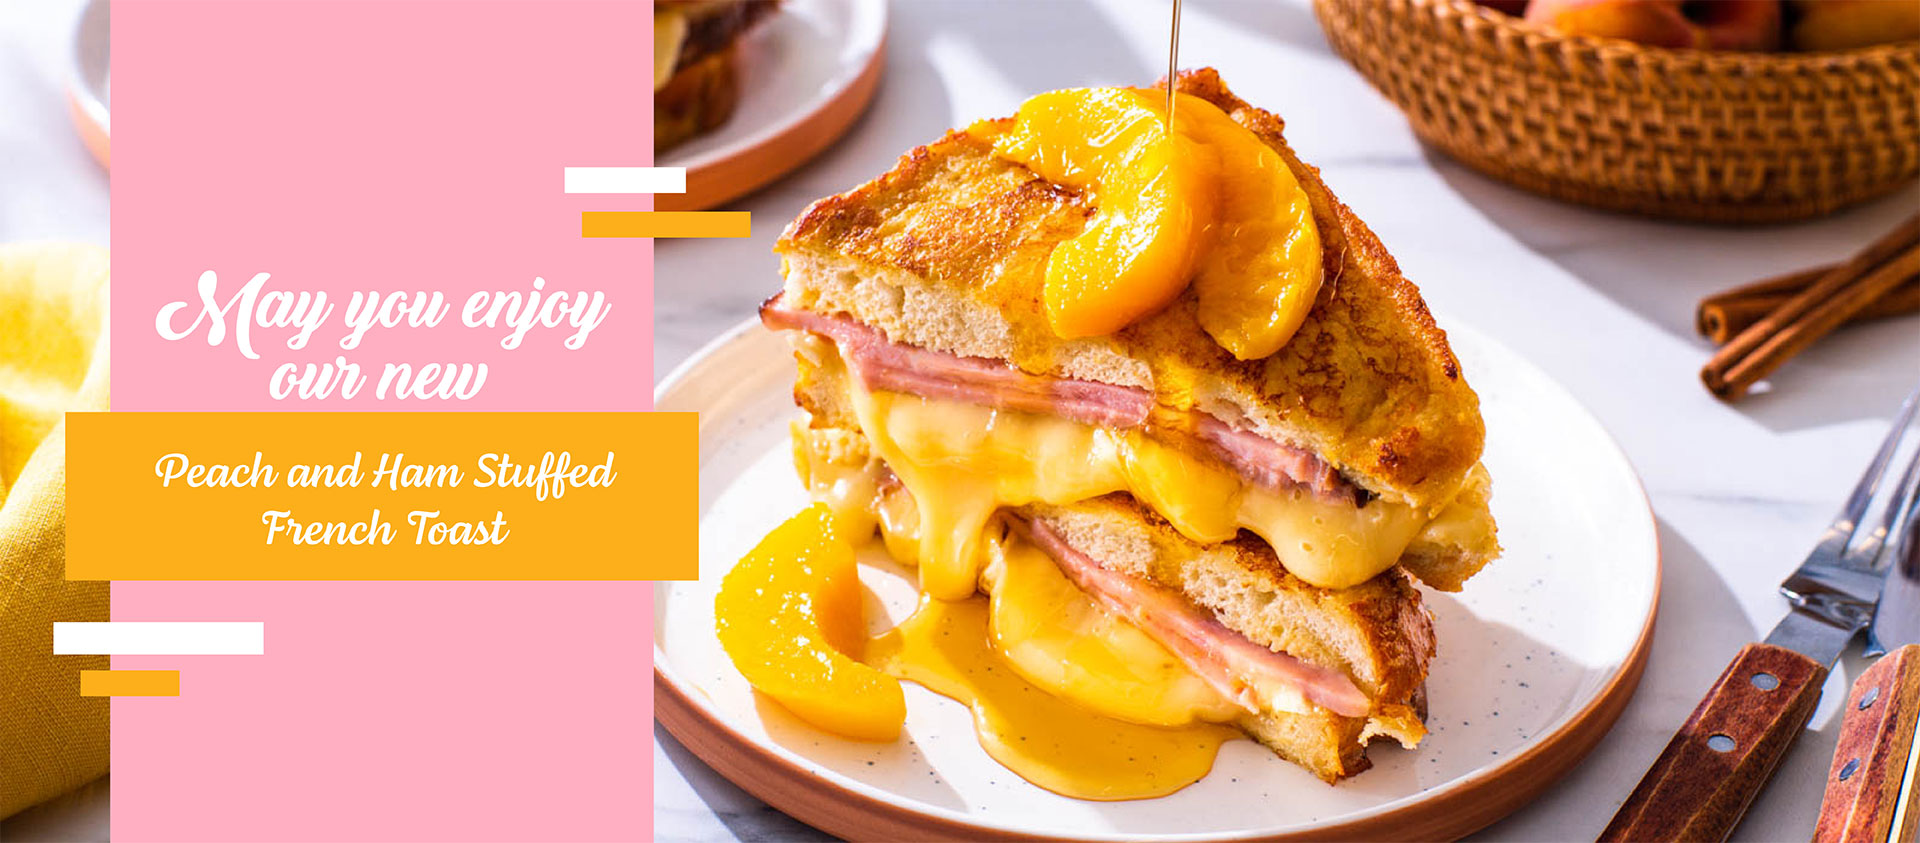 May You Enjoy Our New Peach and Ham Stuffed French Toast